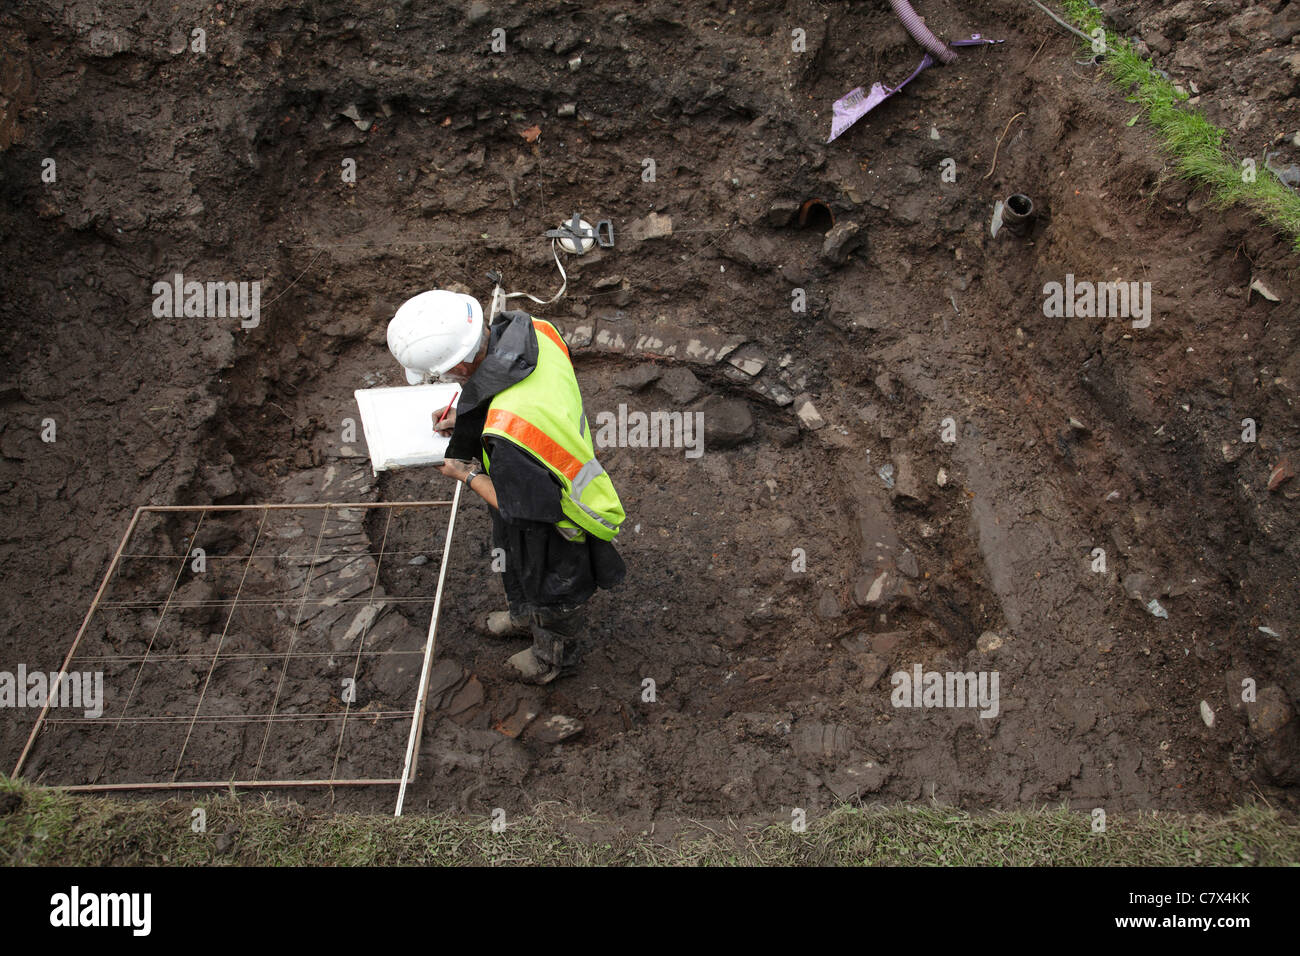 Archaeological dig to investigate Paisley Abbey Drain in Renfrewshire, Scotland, UK, Europe Stock Photo